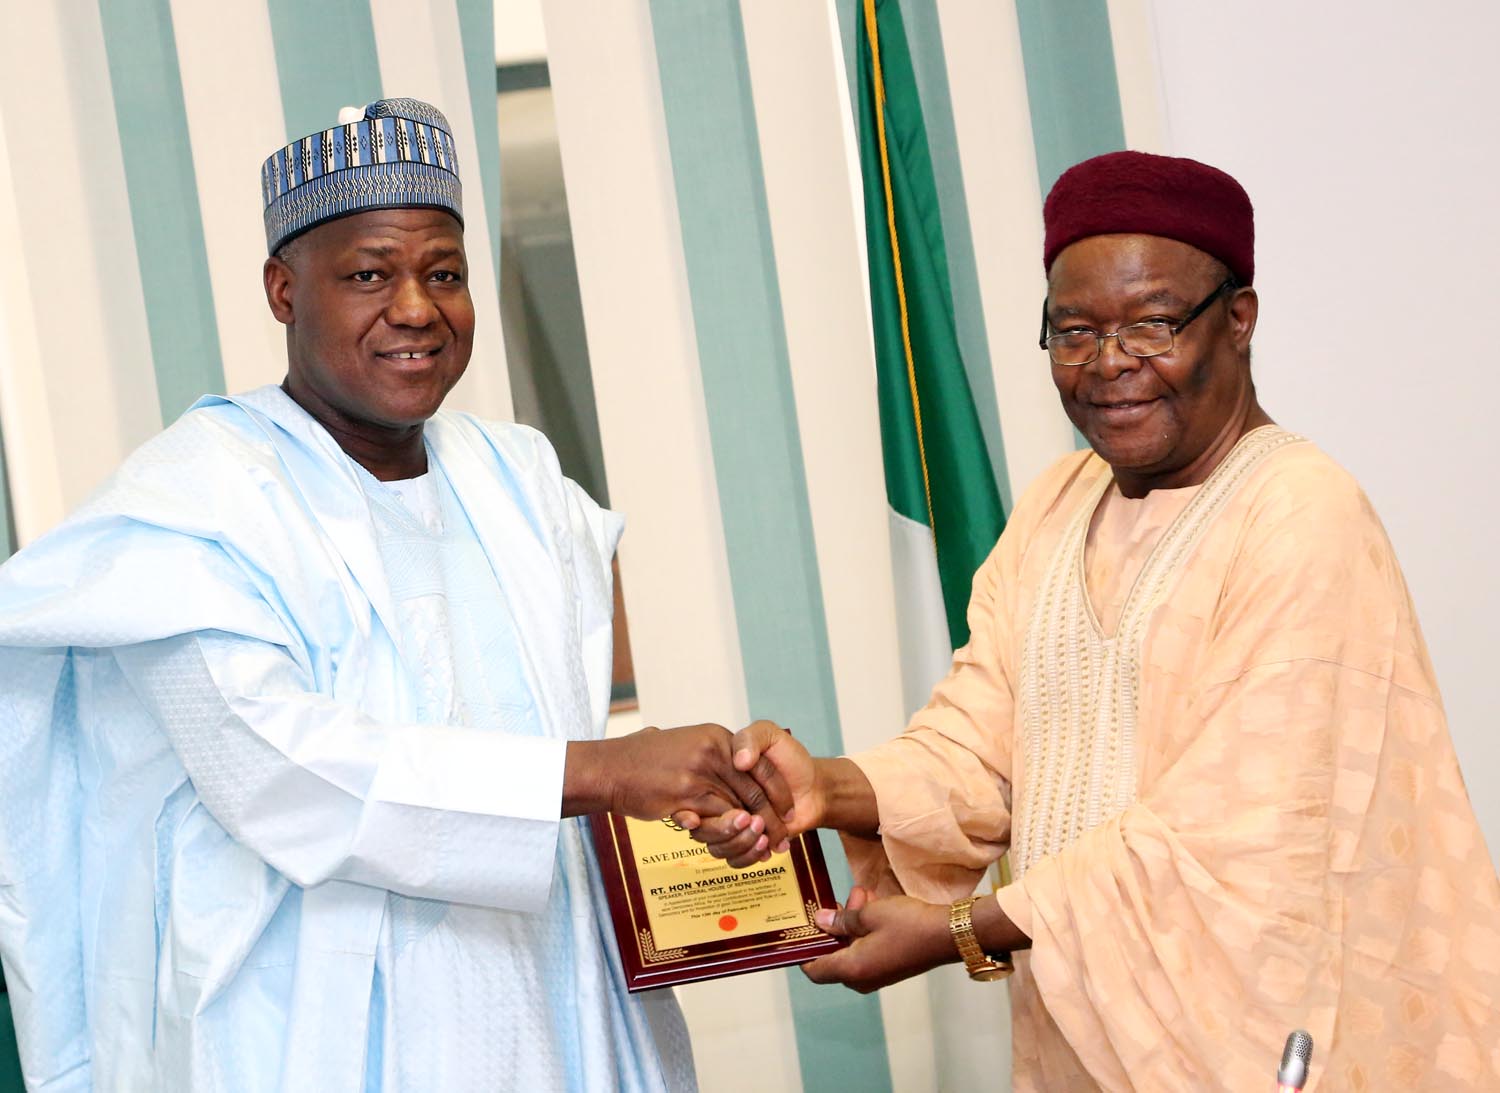 Dogara Chairs African Political Summit, Challenges Nigeria to Key into Global Changes